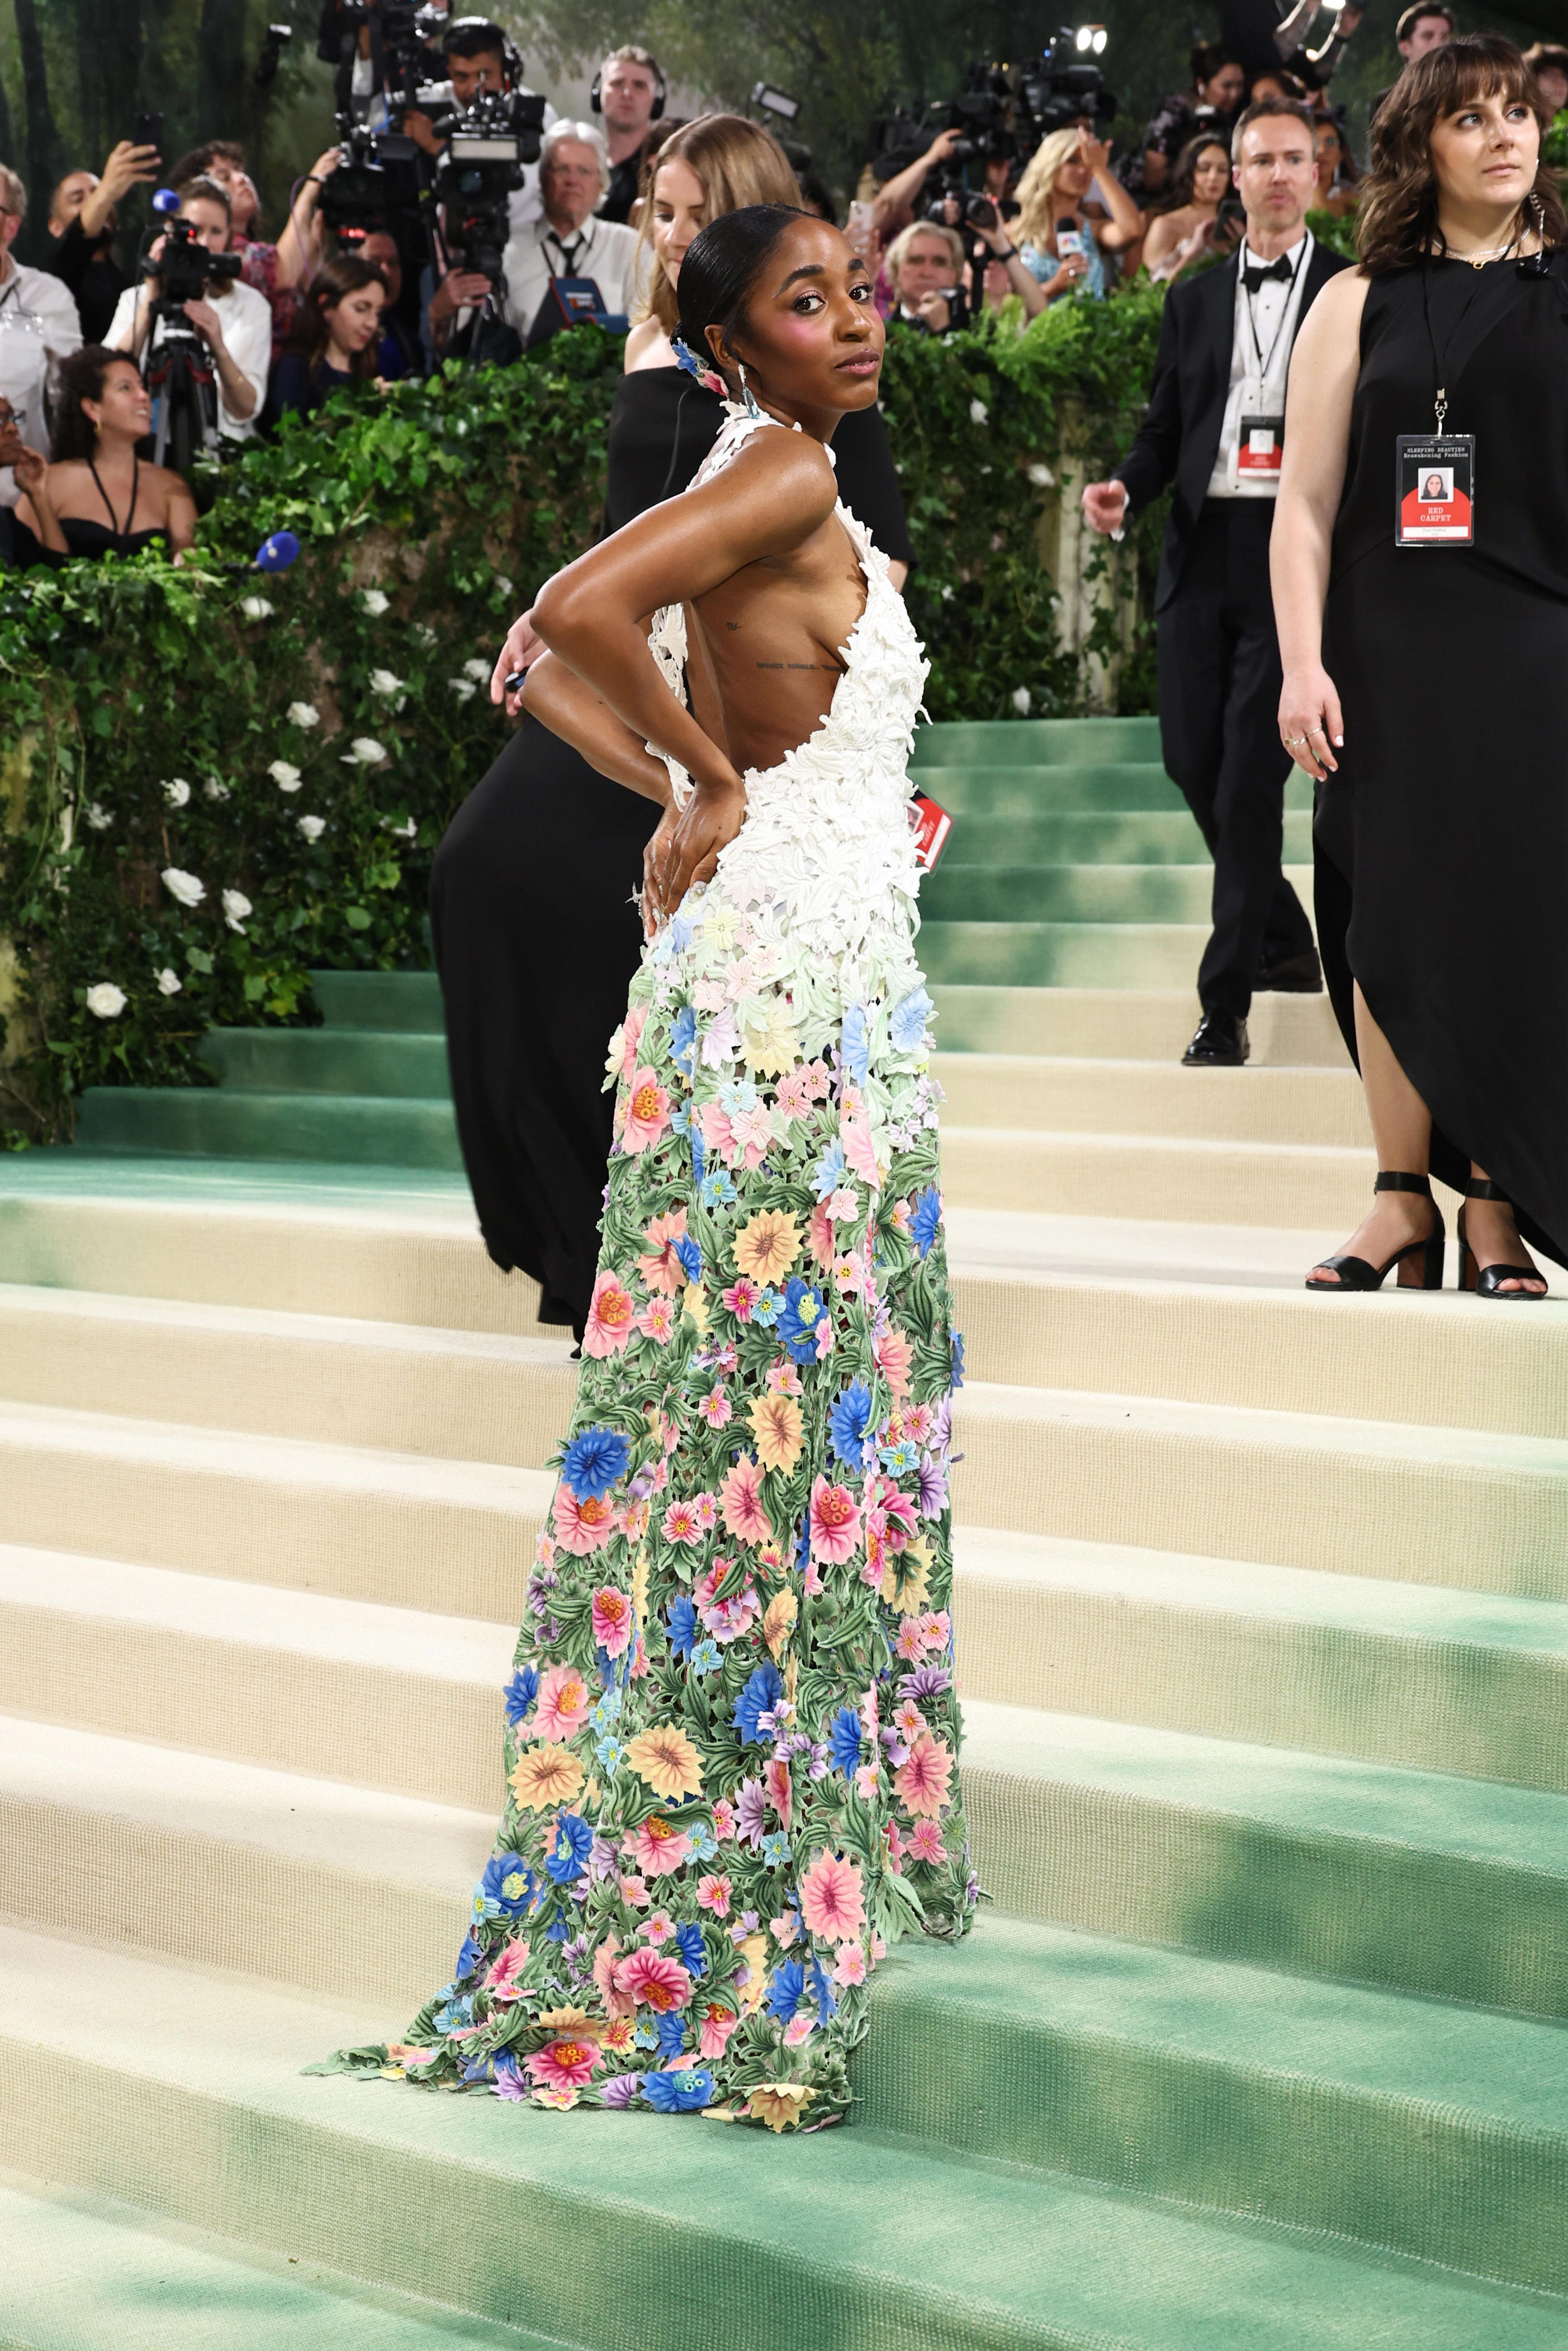 met gala live updates: mindy kaling, tyla offer stunning looks plus we explain the theme